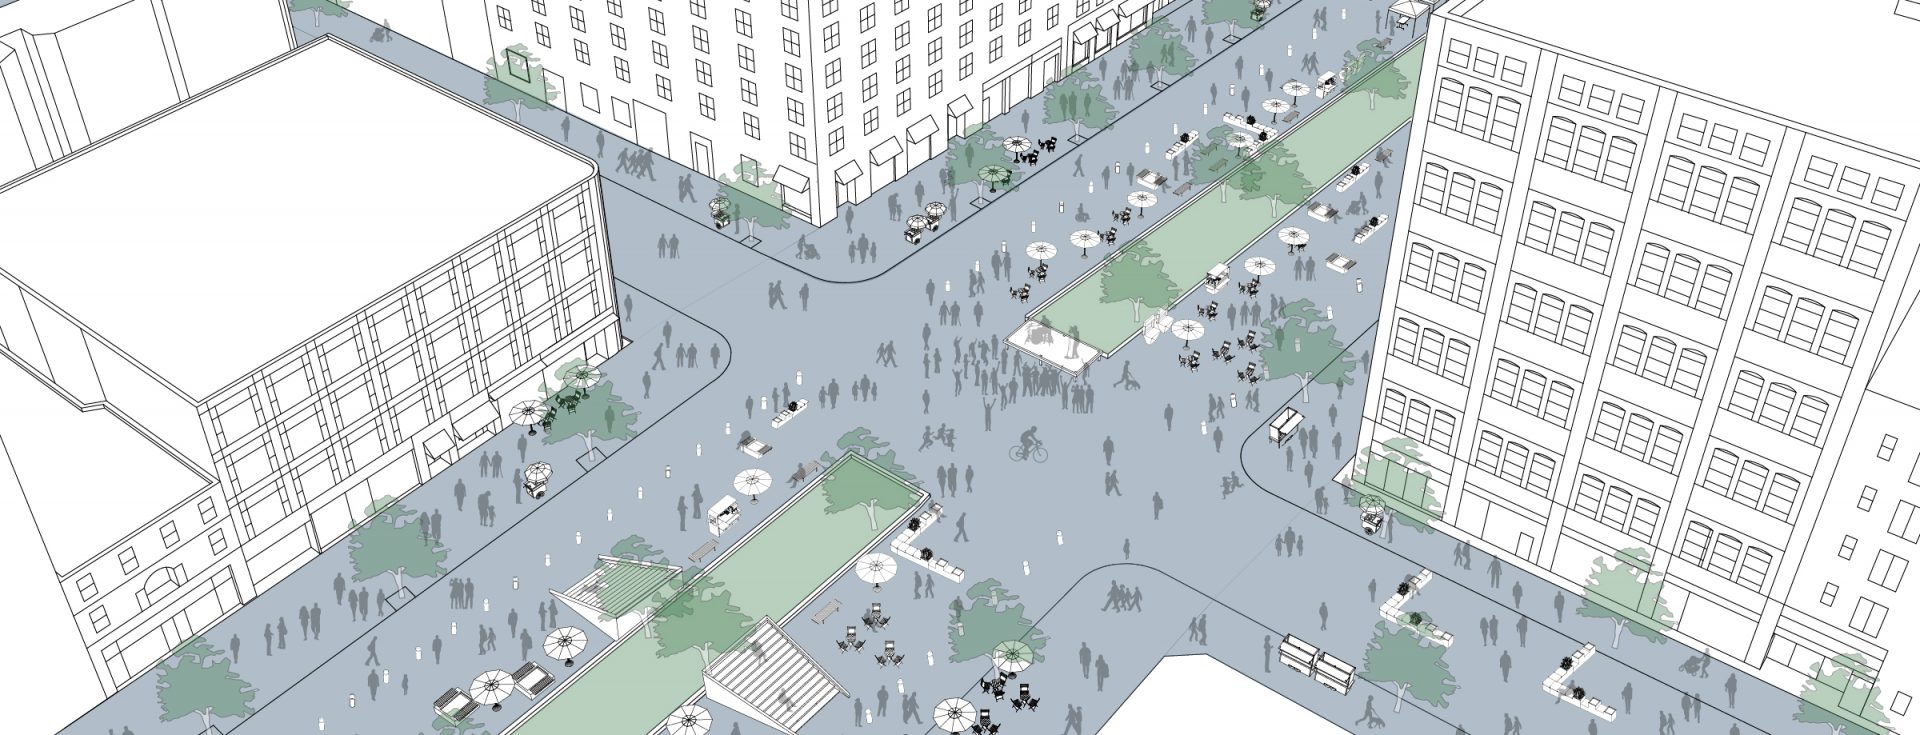 Street Plans joins DC ‘Crossing the Street’ Initiative